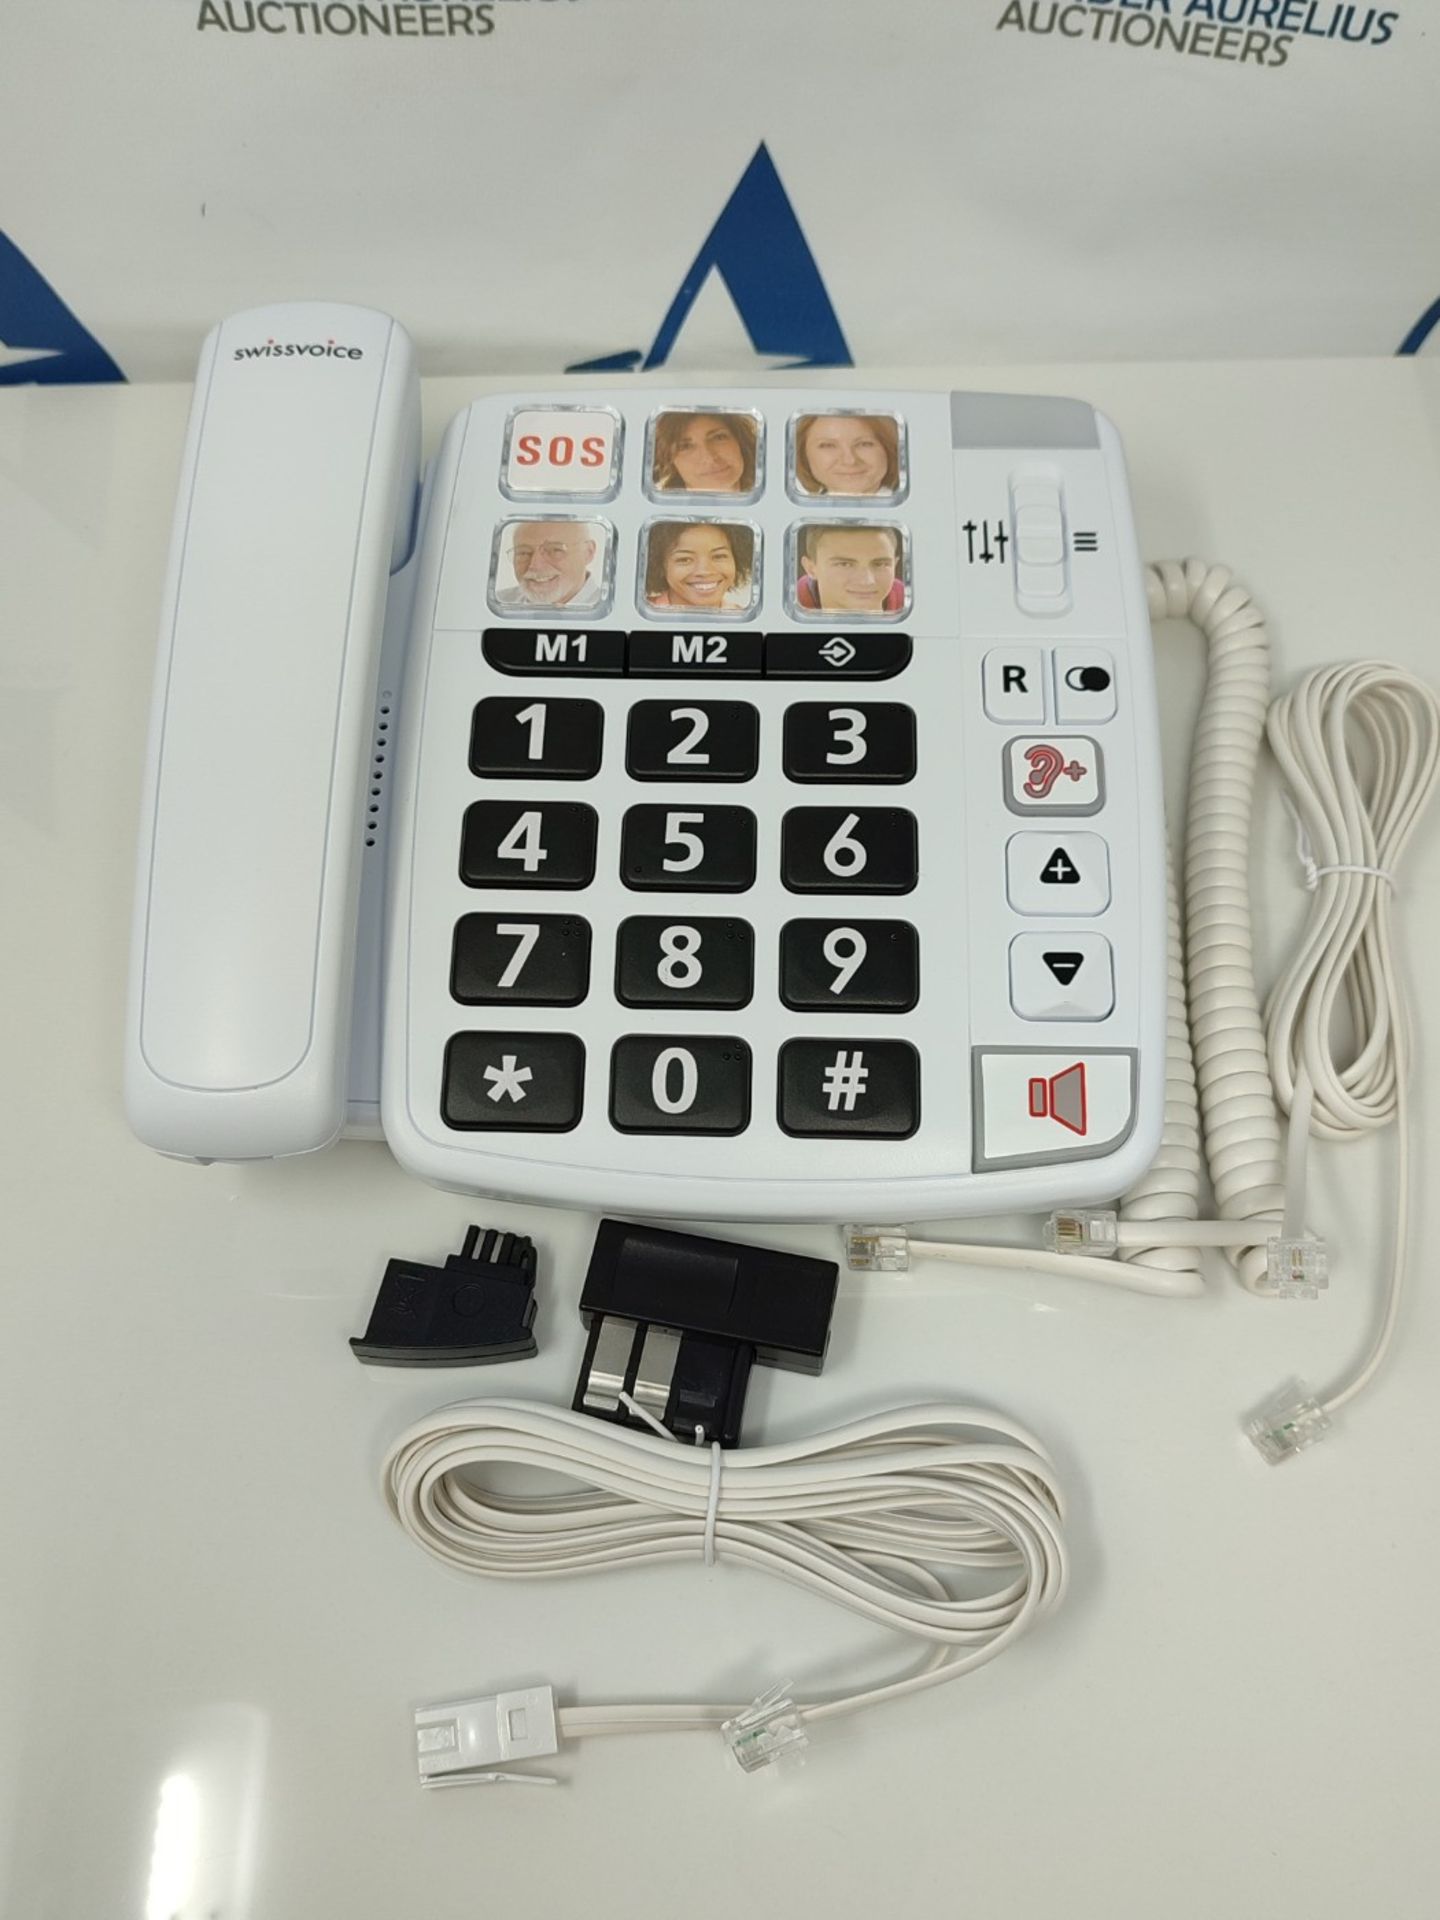 SWISSVOICE Xtra 1110 - Big Button Phone for Elderly - Phones for Hard of Hearing - Dem - Image 2 of 2